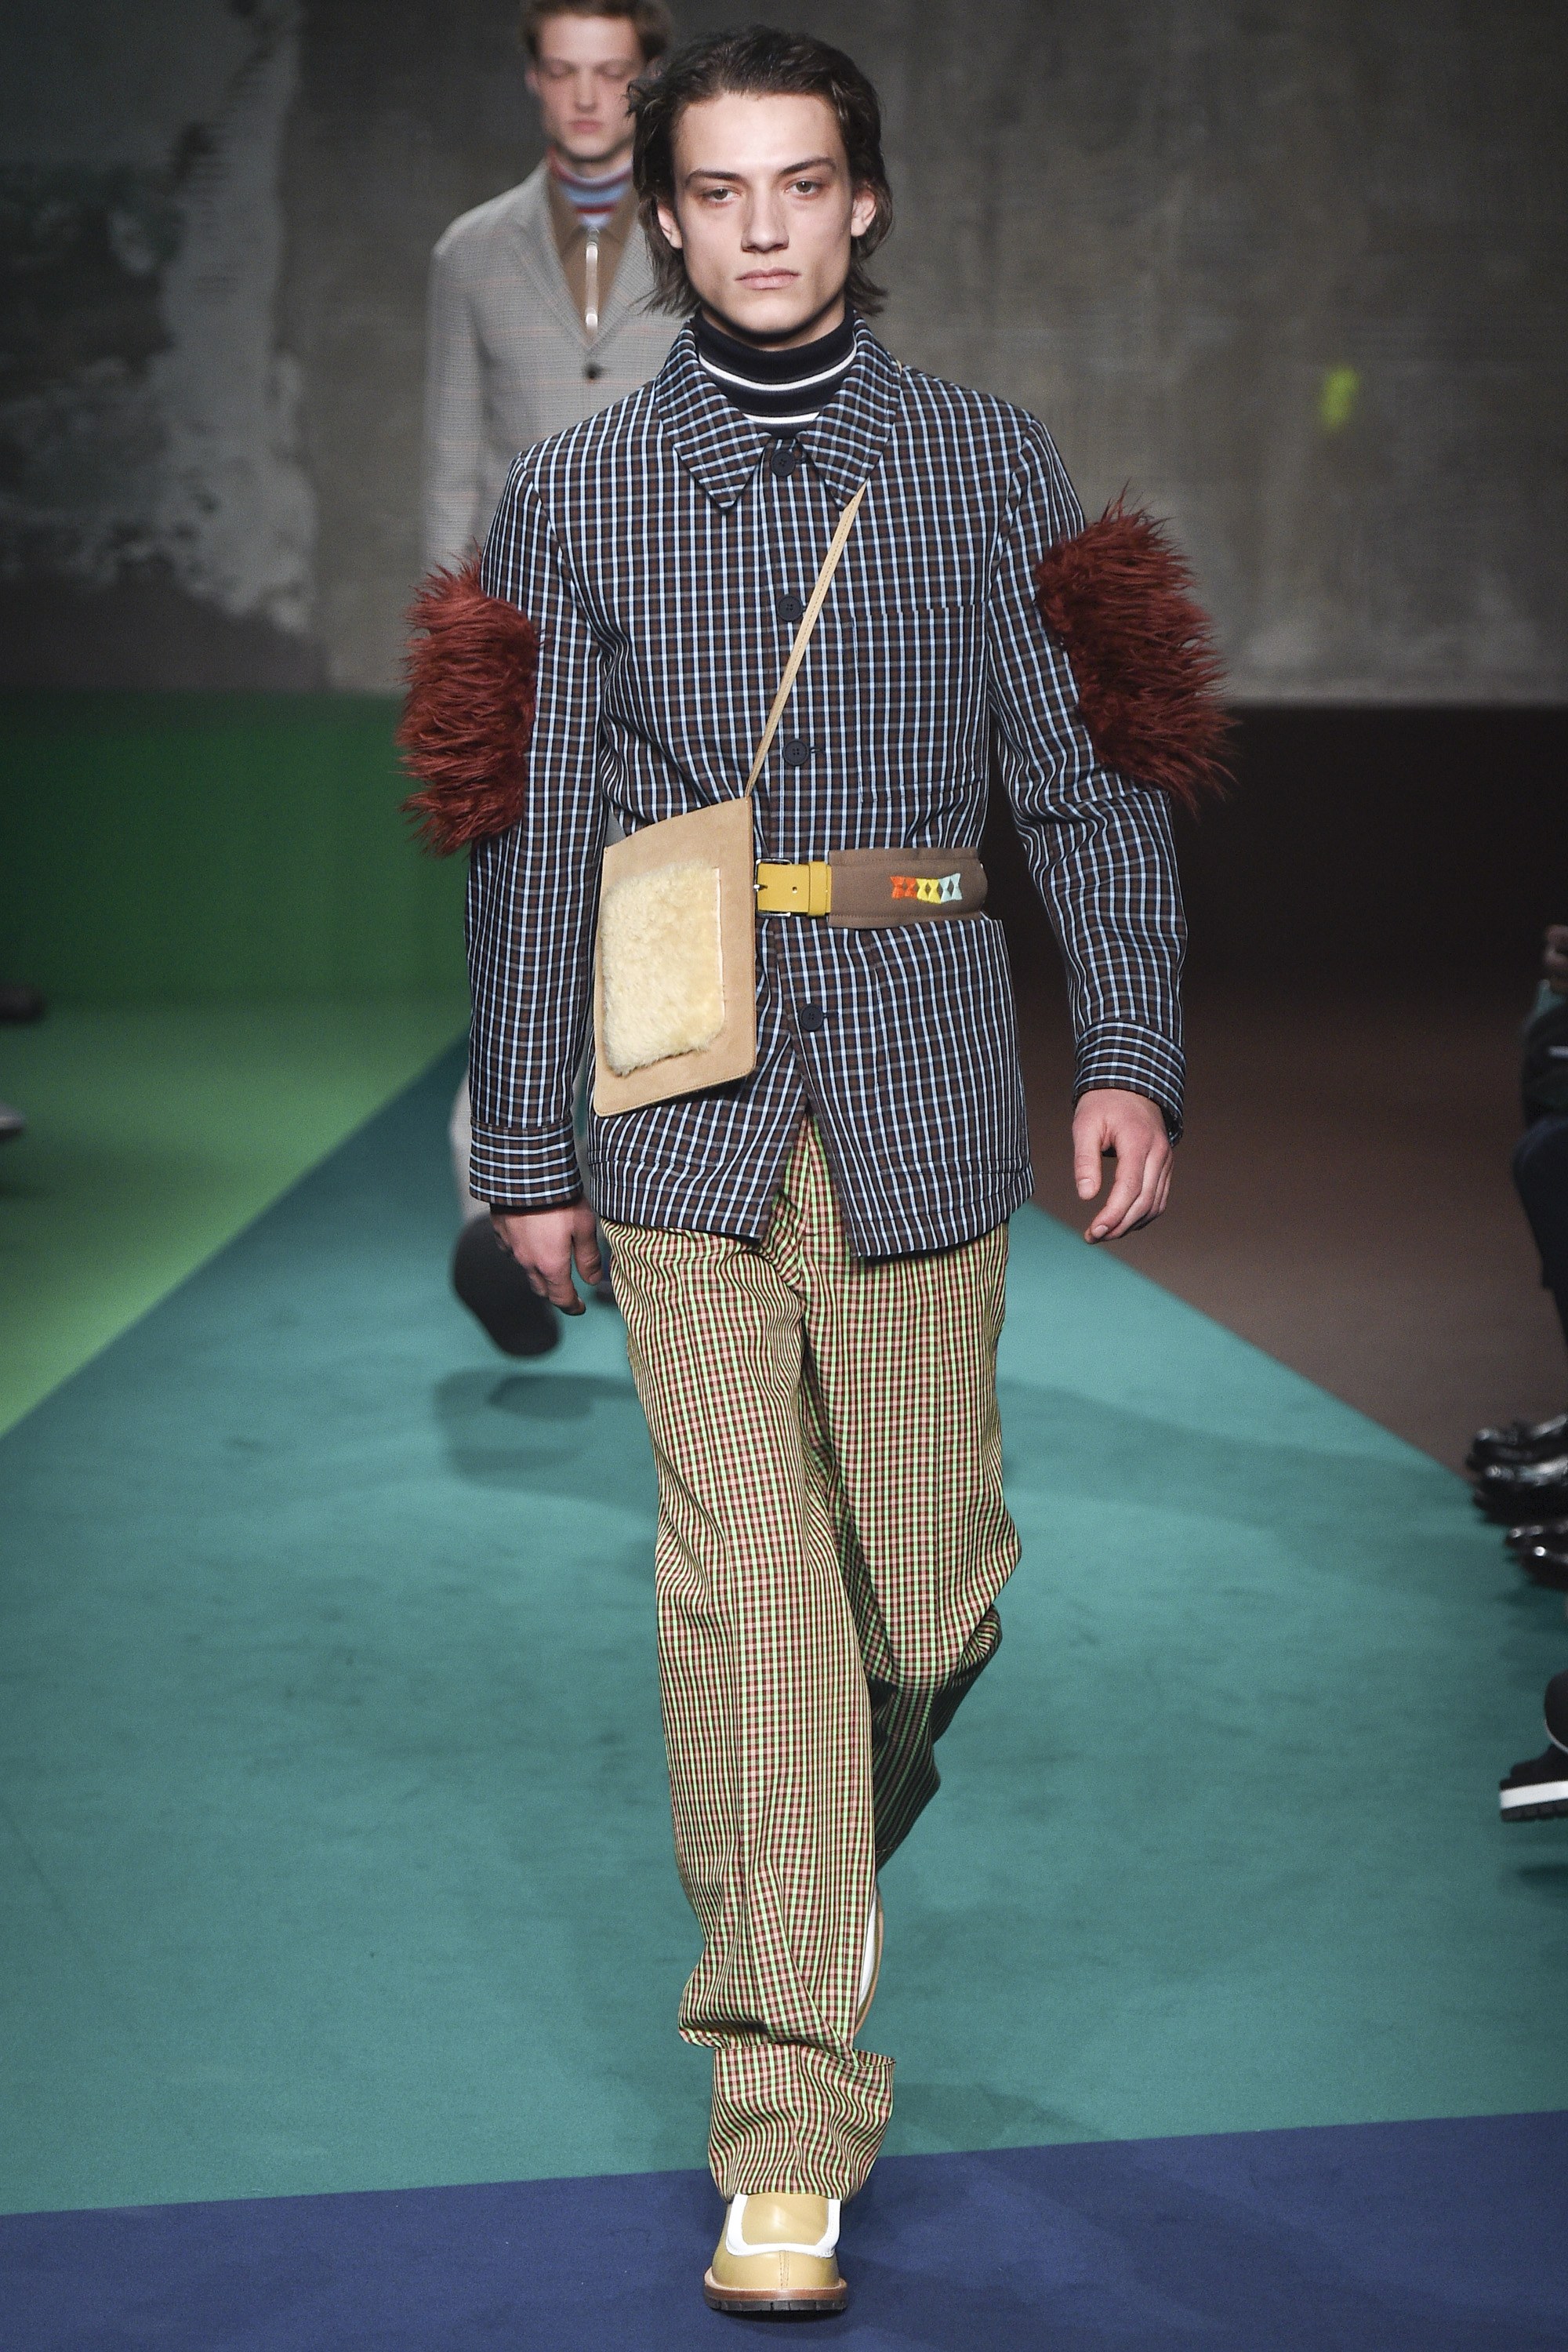 OMG, it's called Fashion. Look it up: Marni FW17 men's collection - OMG ...